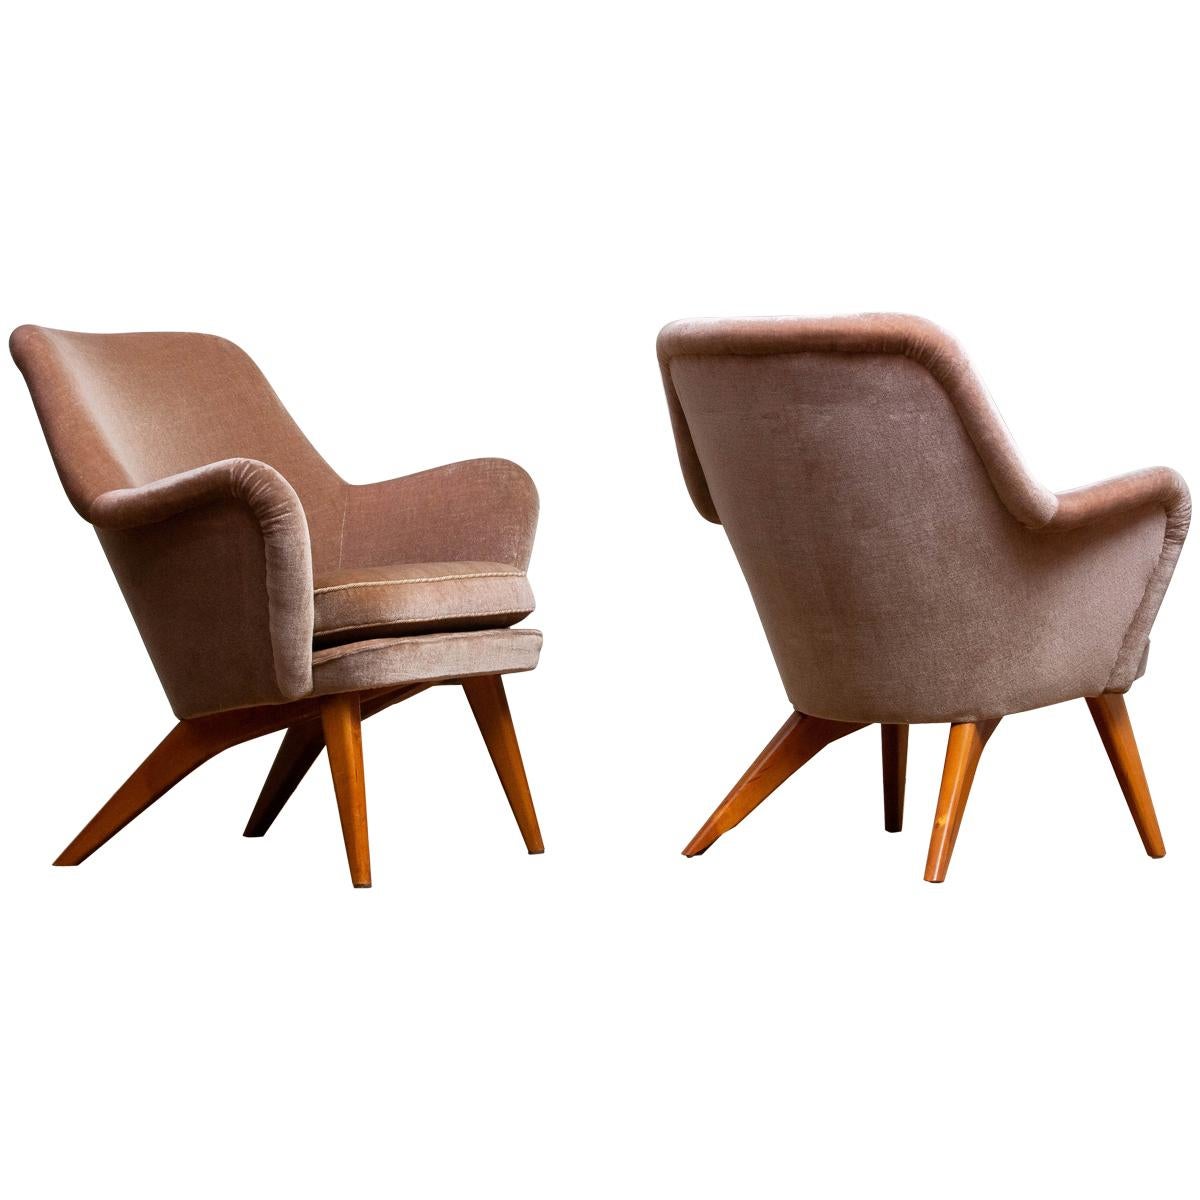 1950s Pair of Chairs by Carl Gustav Hiort af Ornäs for Puunveisto Oy-Trasnideri 7